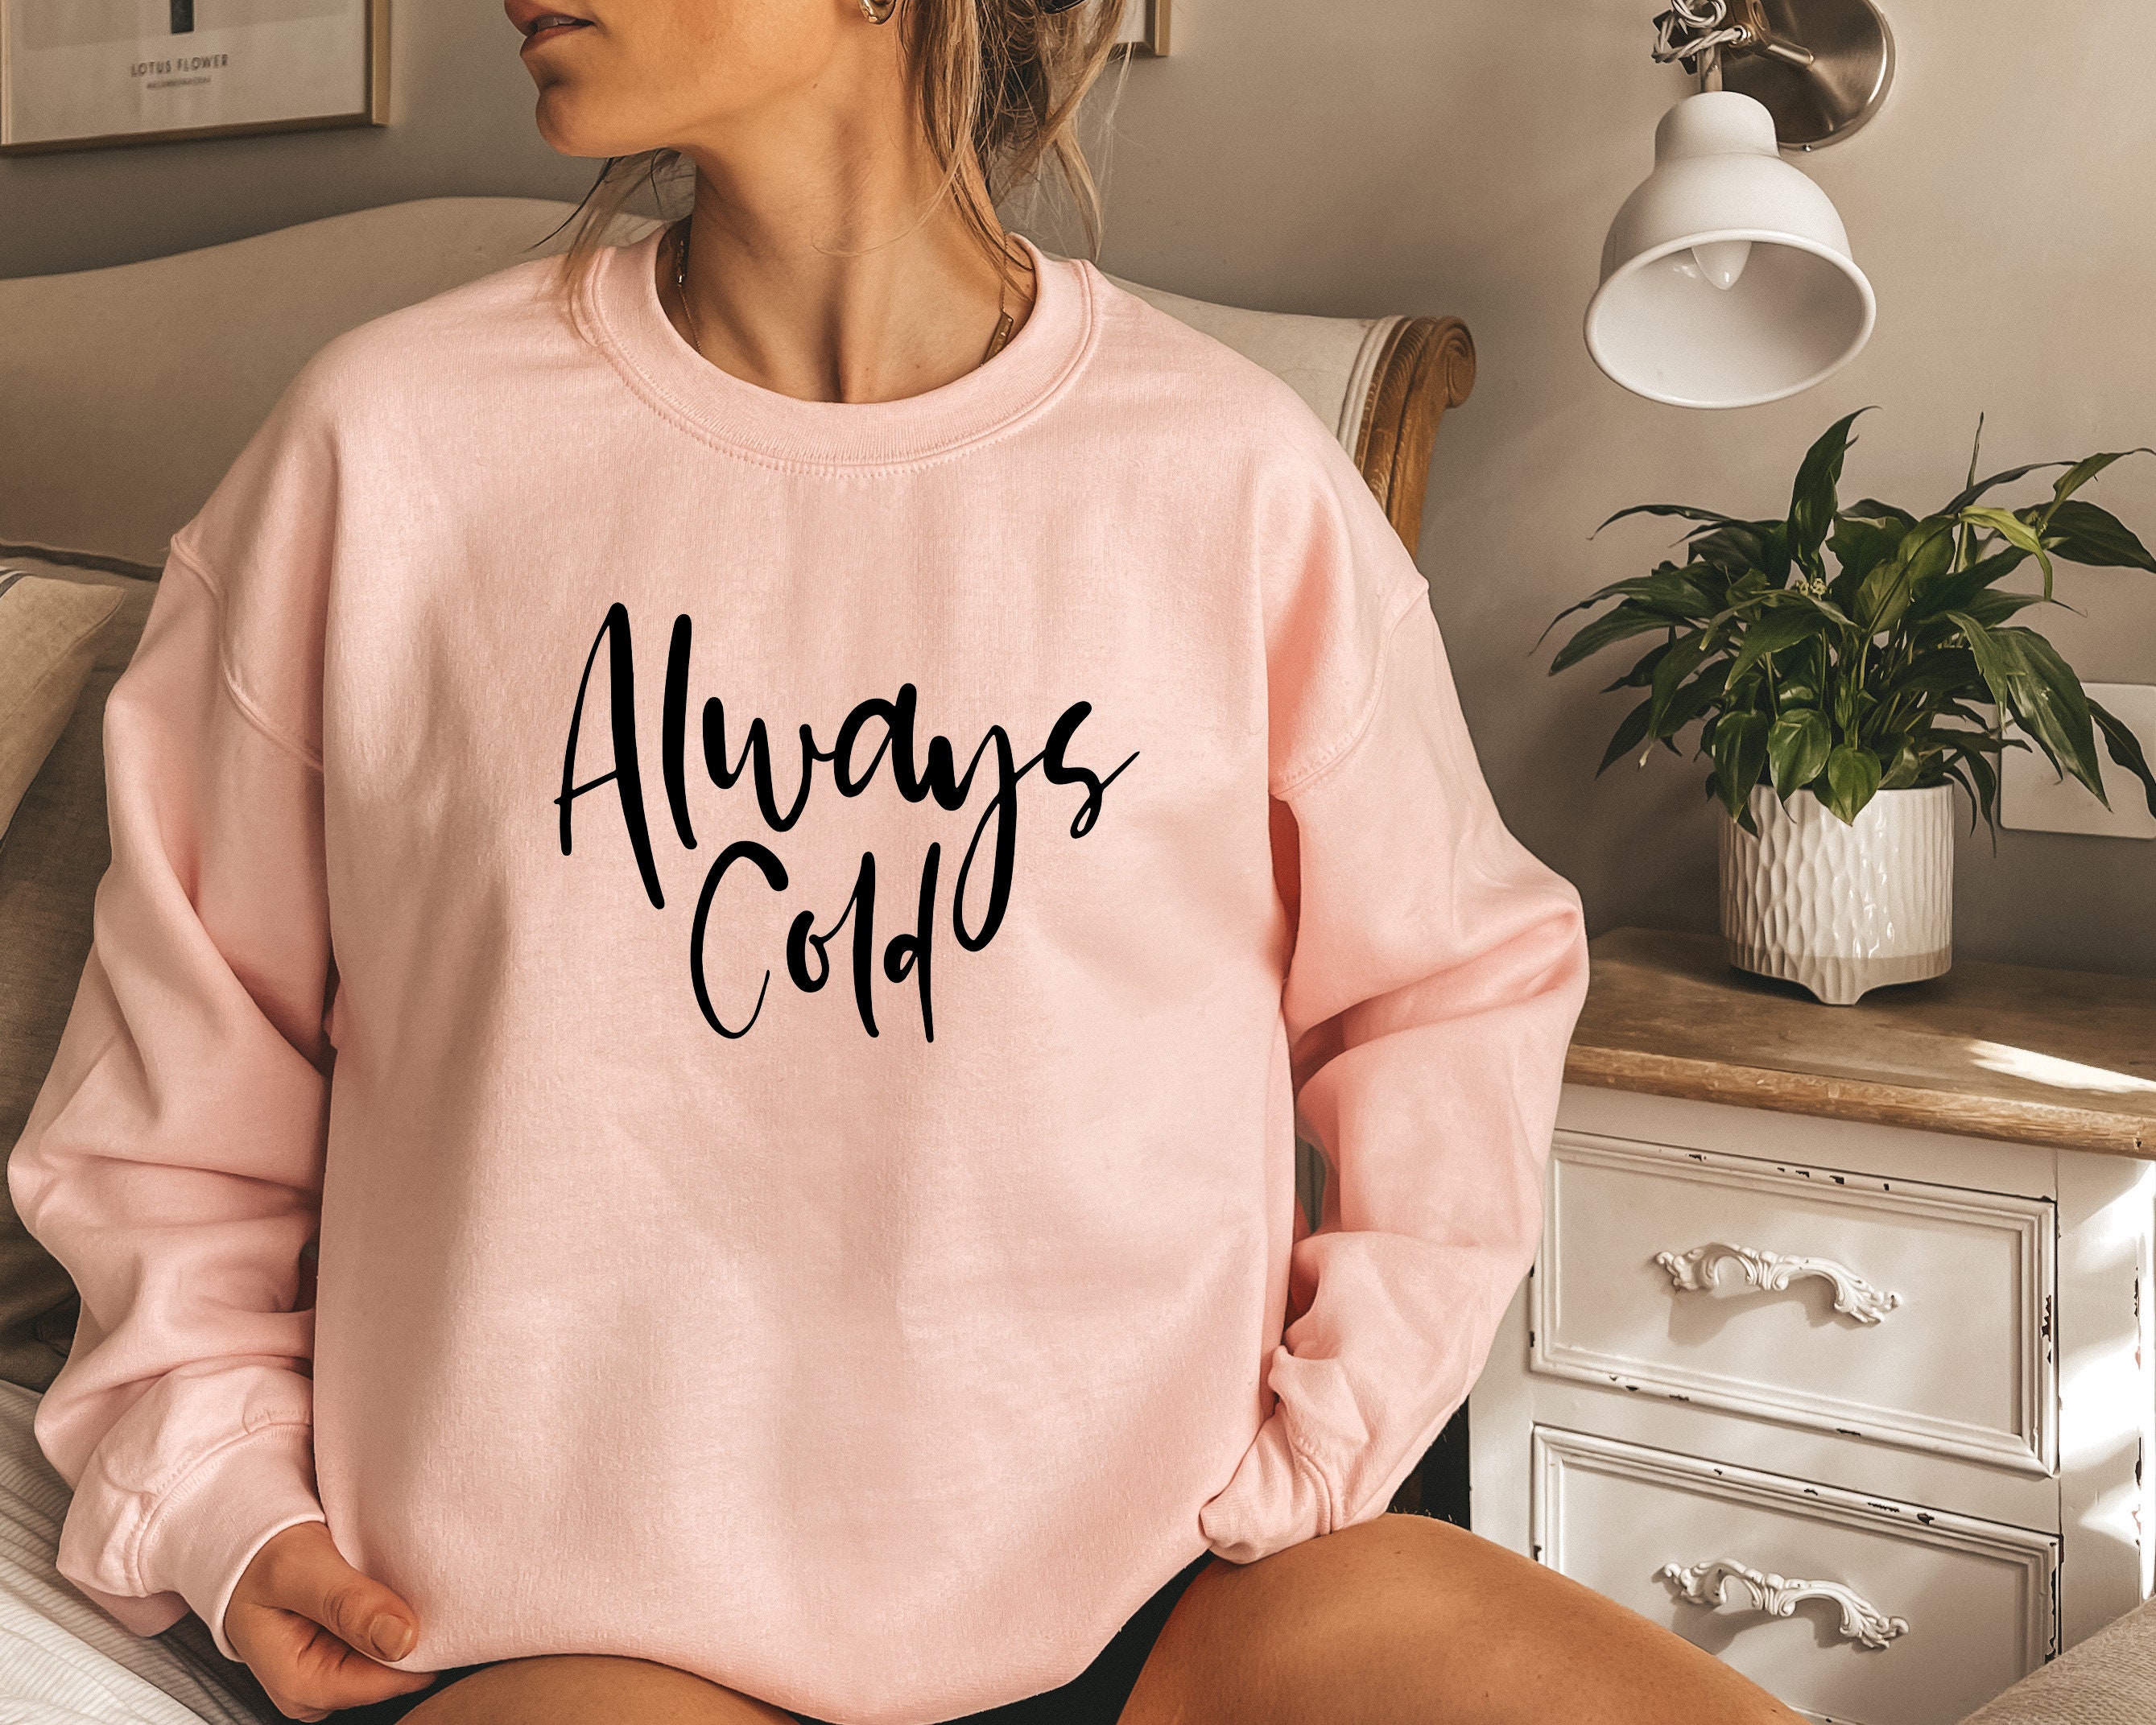 Unisex Sweatshirts for People who are ‘Always Cold’